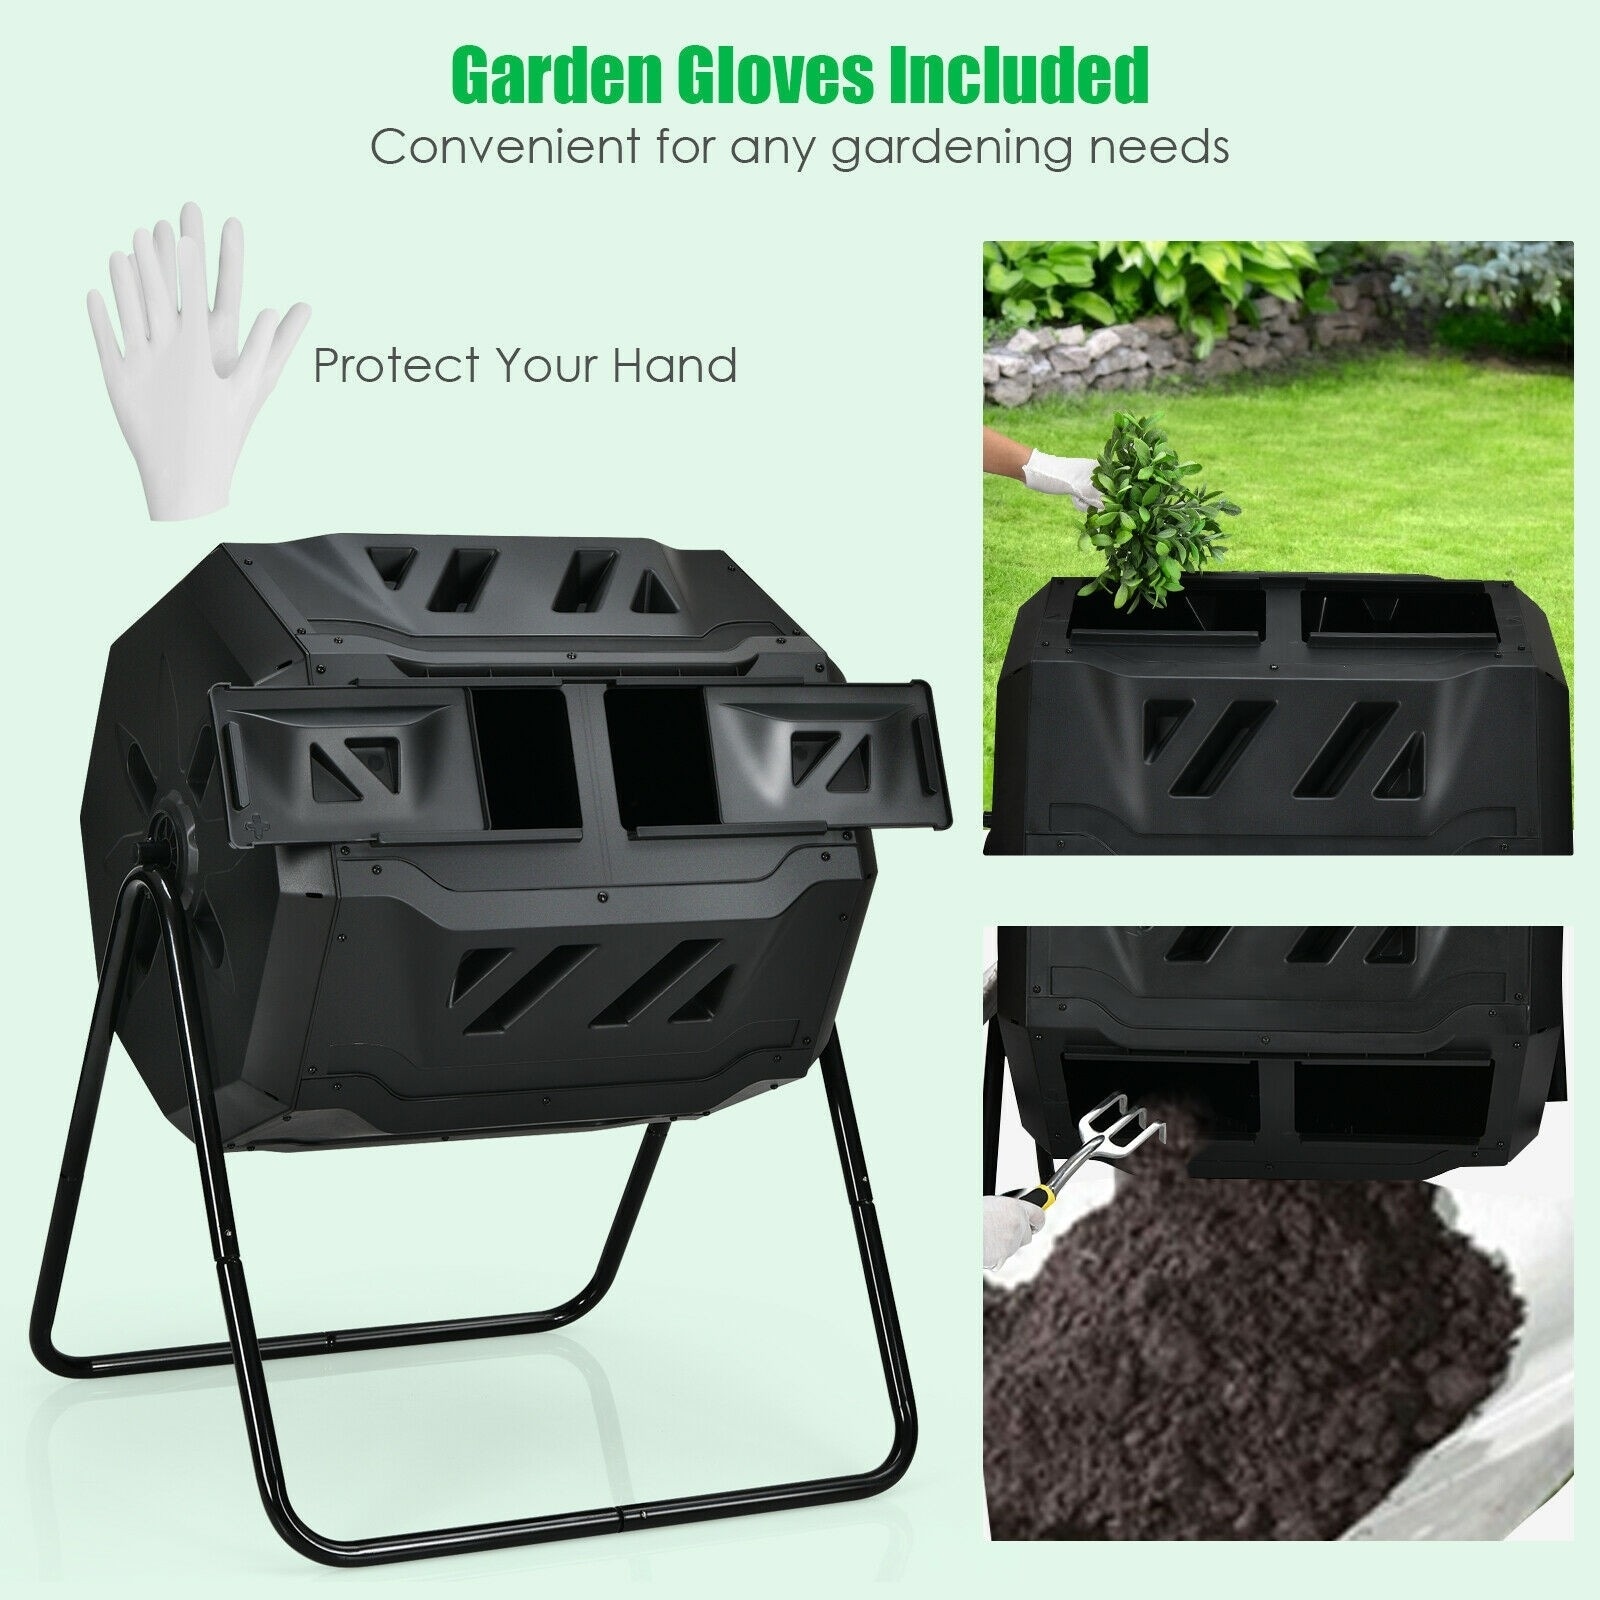 https://ak1.ostkcdn.com/images/products/is/images/direct/f12d0af9999828eacfecbb8581164d0ac46b0118/43-Gallon-Composting-Tumbler-Compost-Bin-with-Dual-Rotating-Chamber.jpg